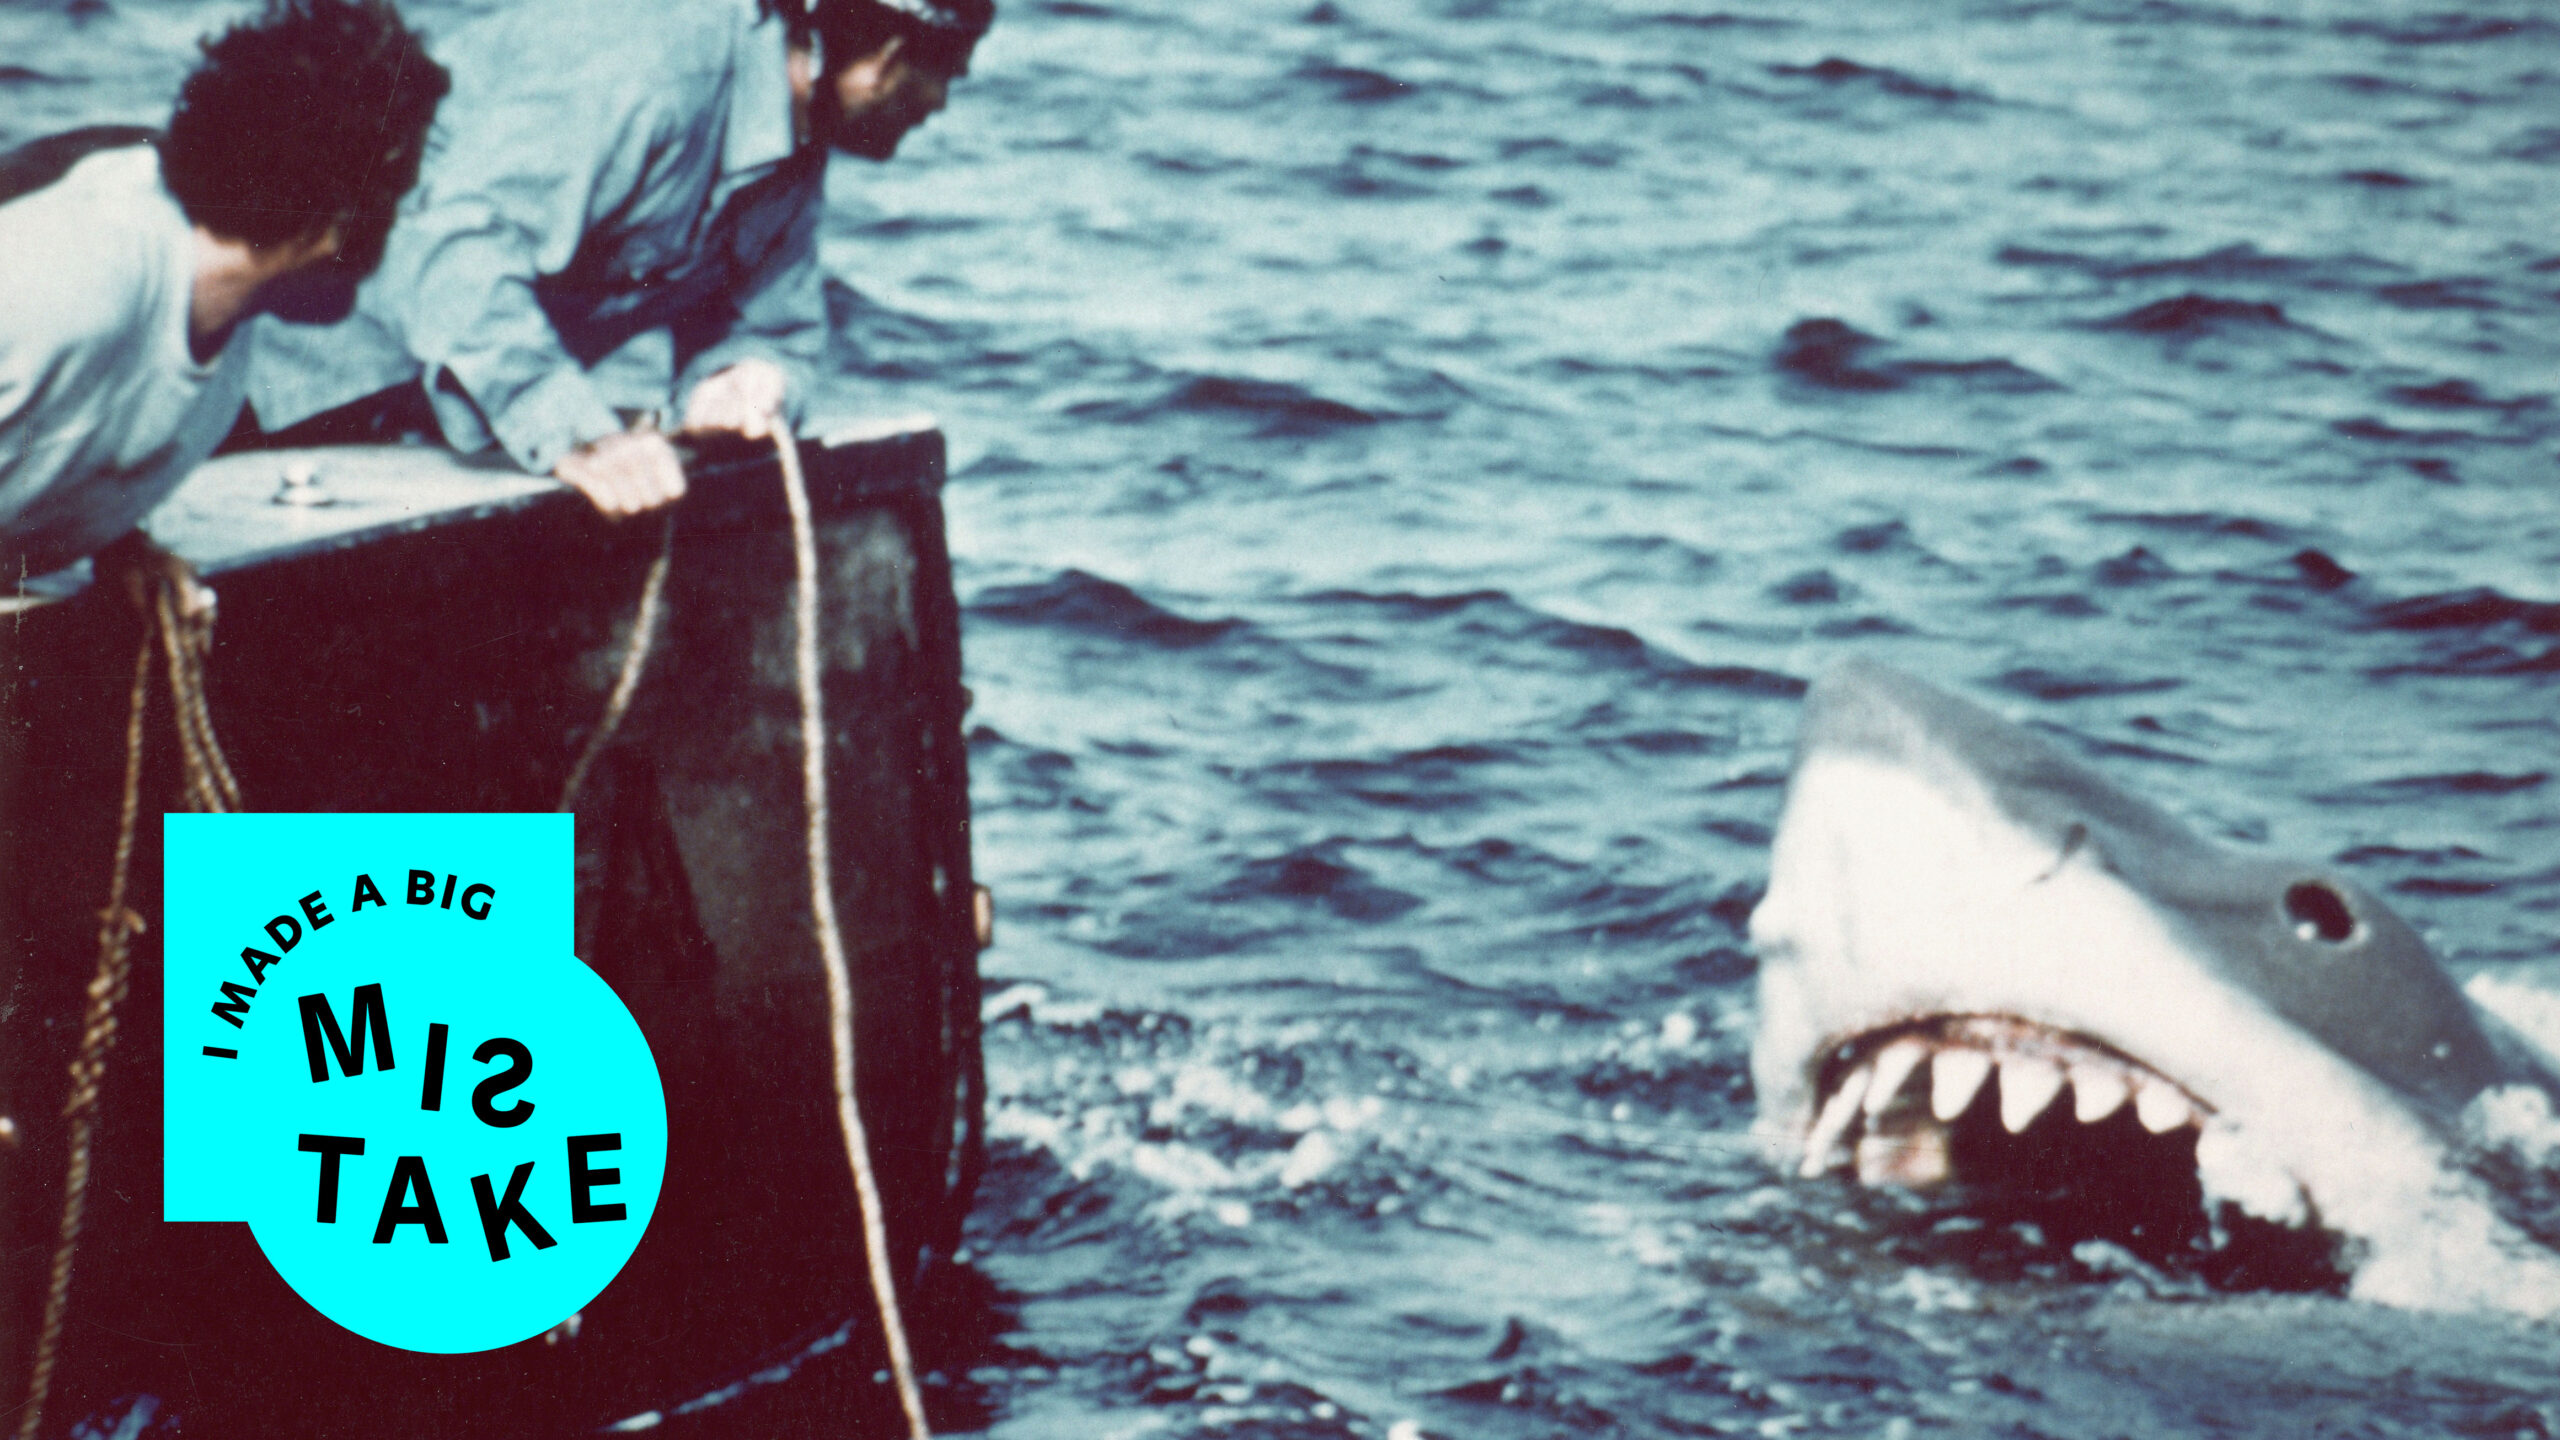 Jaws creators regretted making sharks the monsters